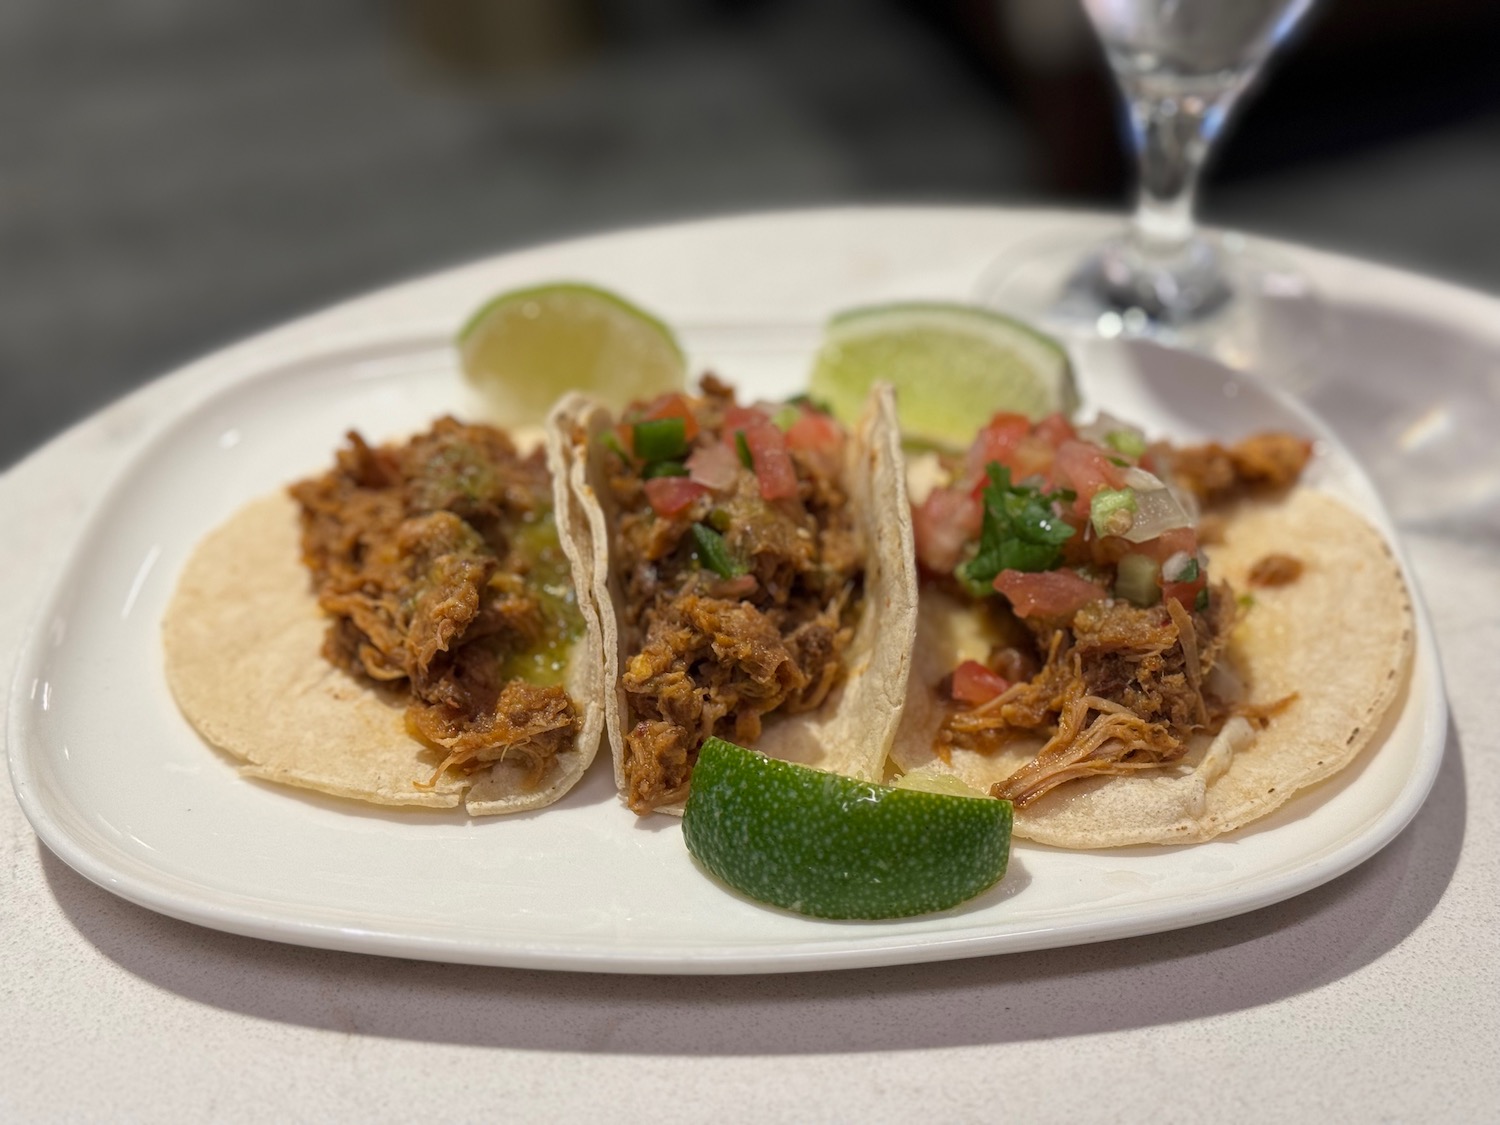 a plate of tacos with meat and limes